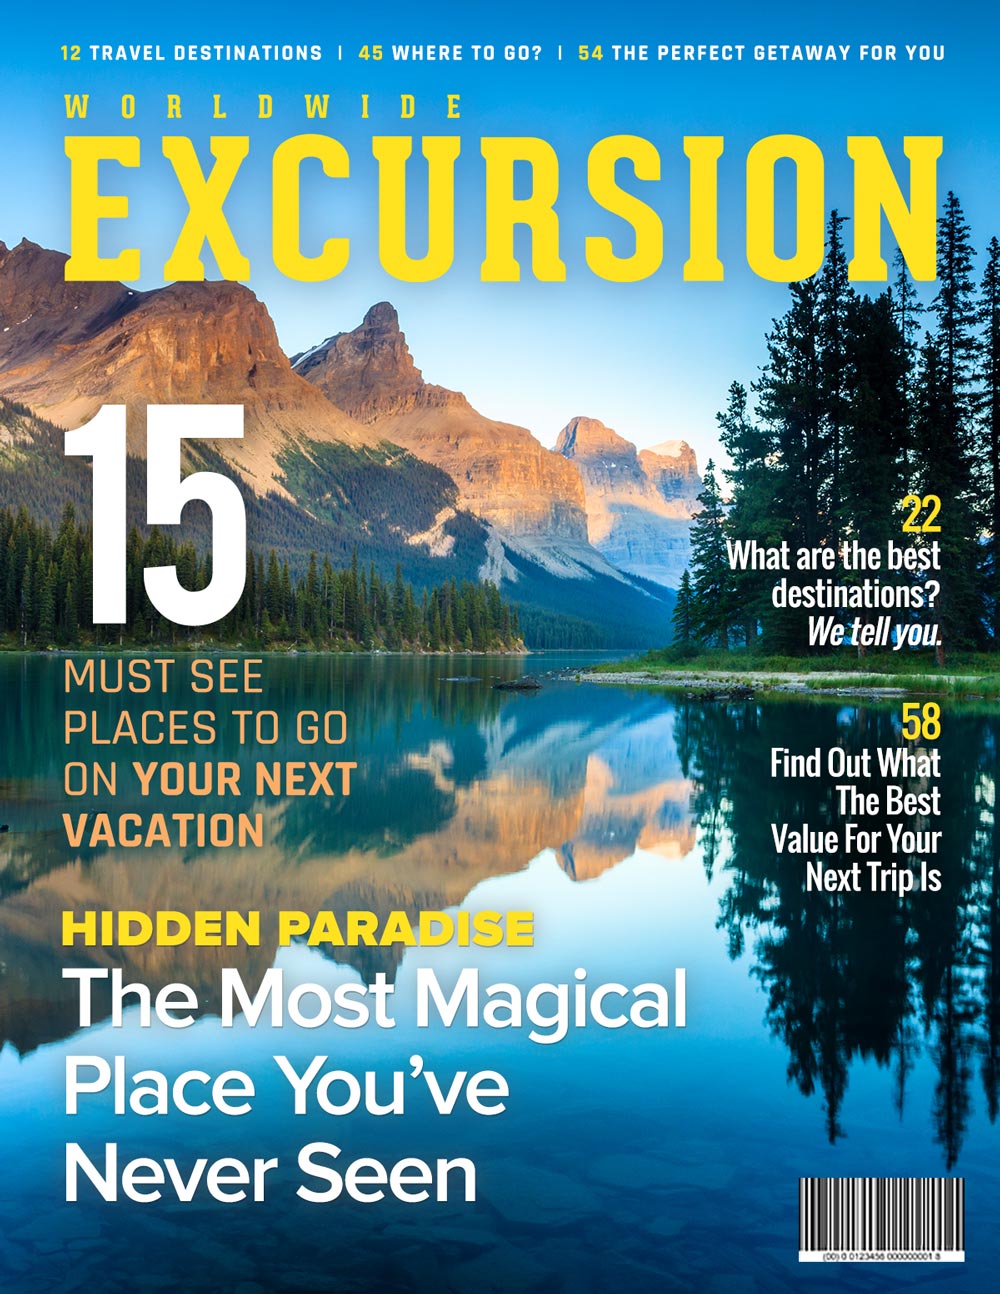 Excursion August 2019 cover